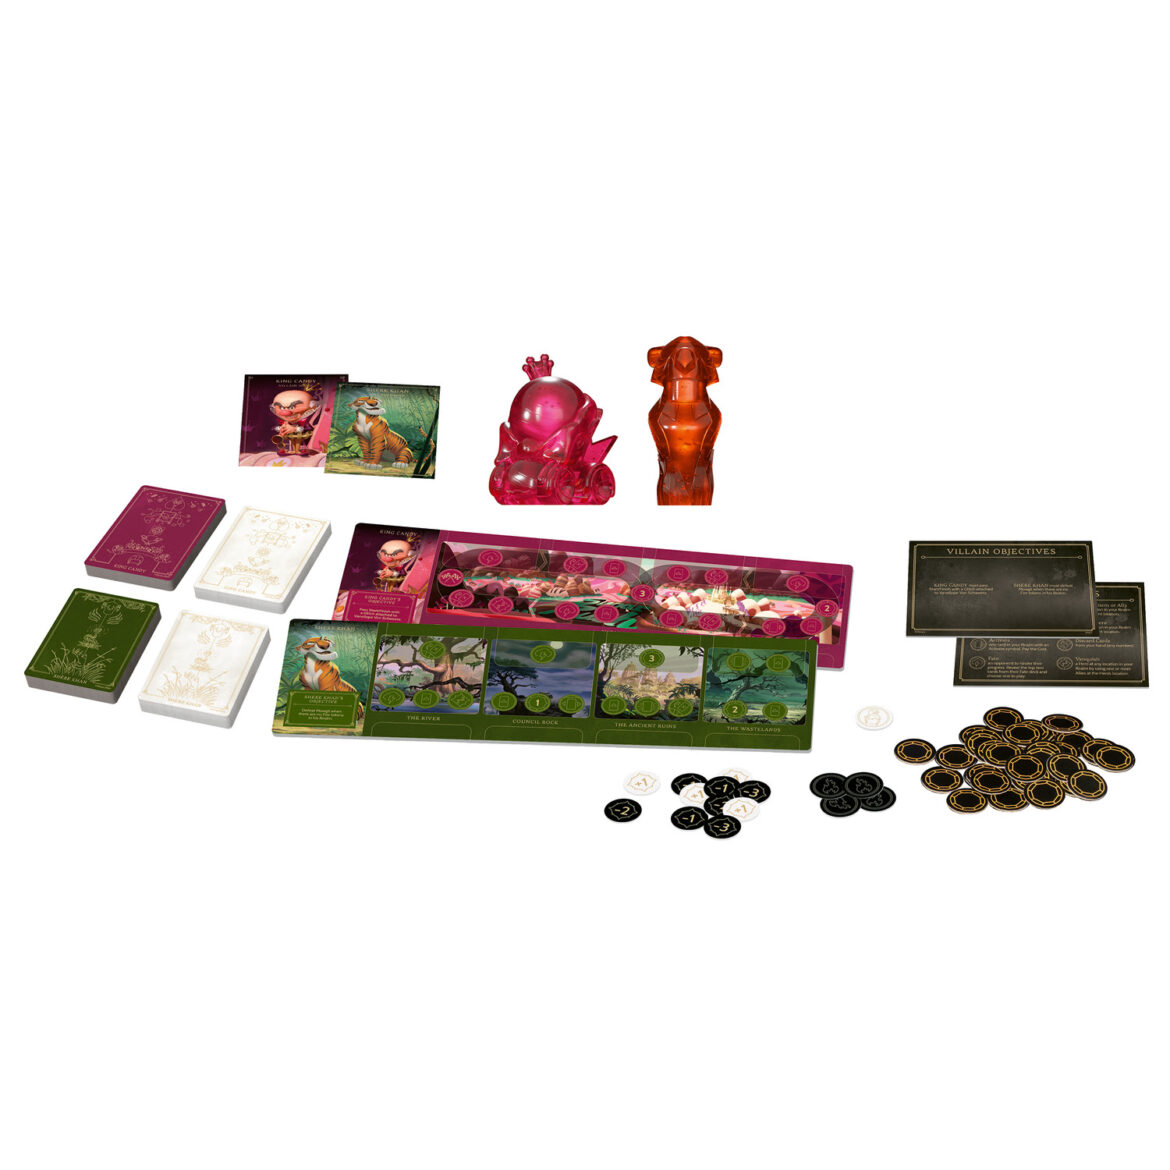 Product Review Villainous Sugar and Spite Expansion from Ravensburger